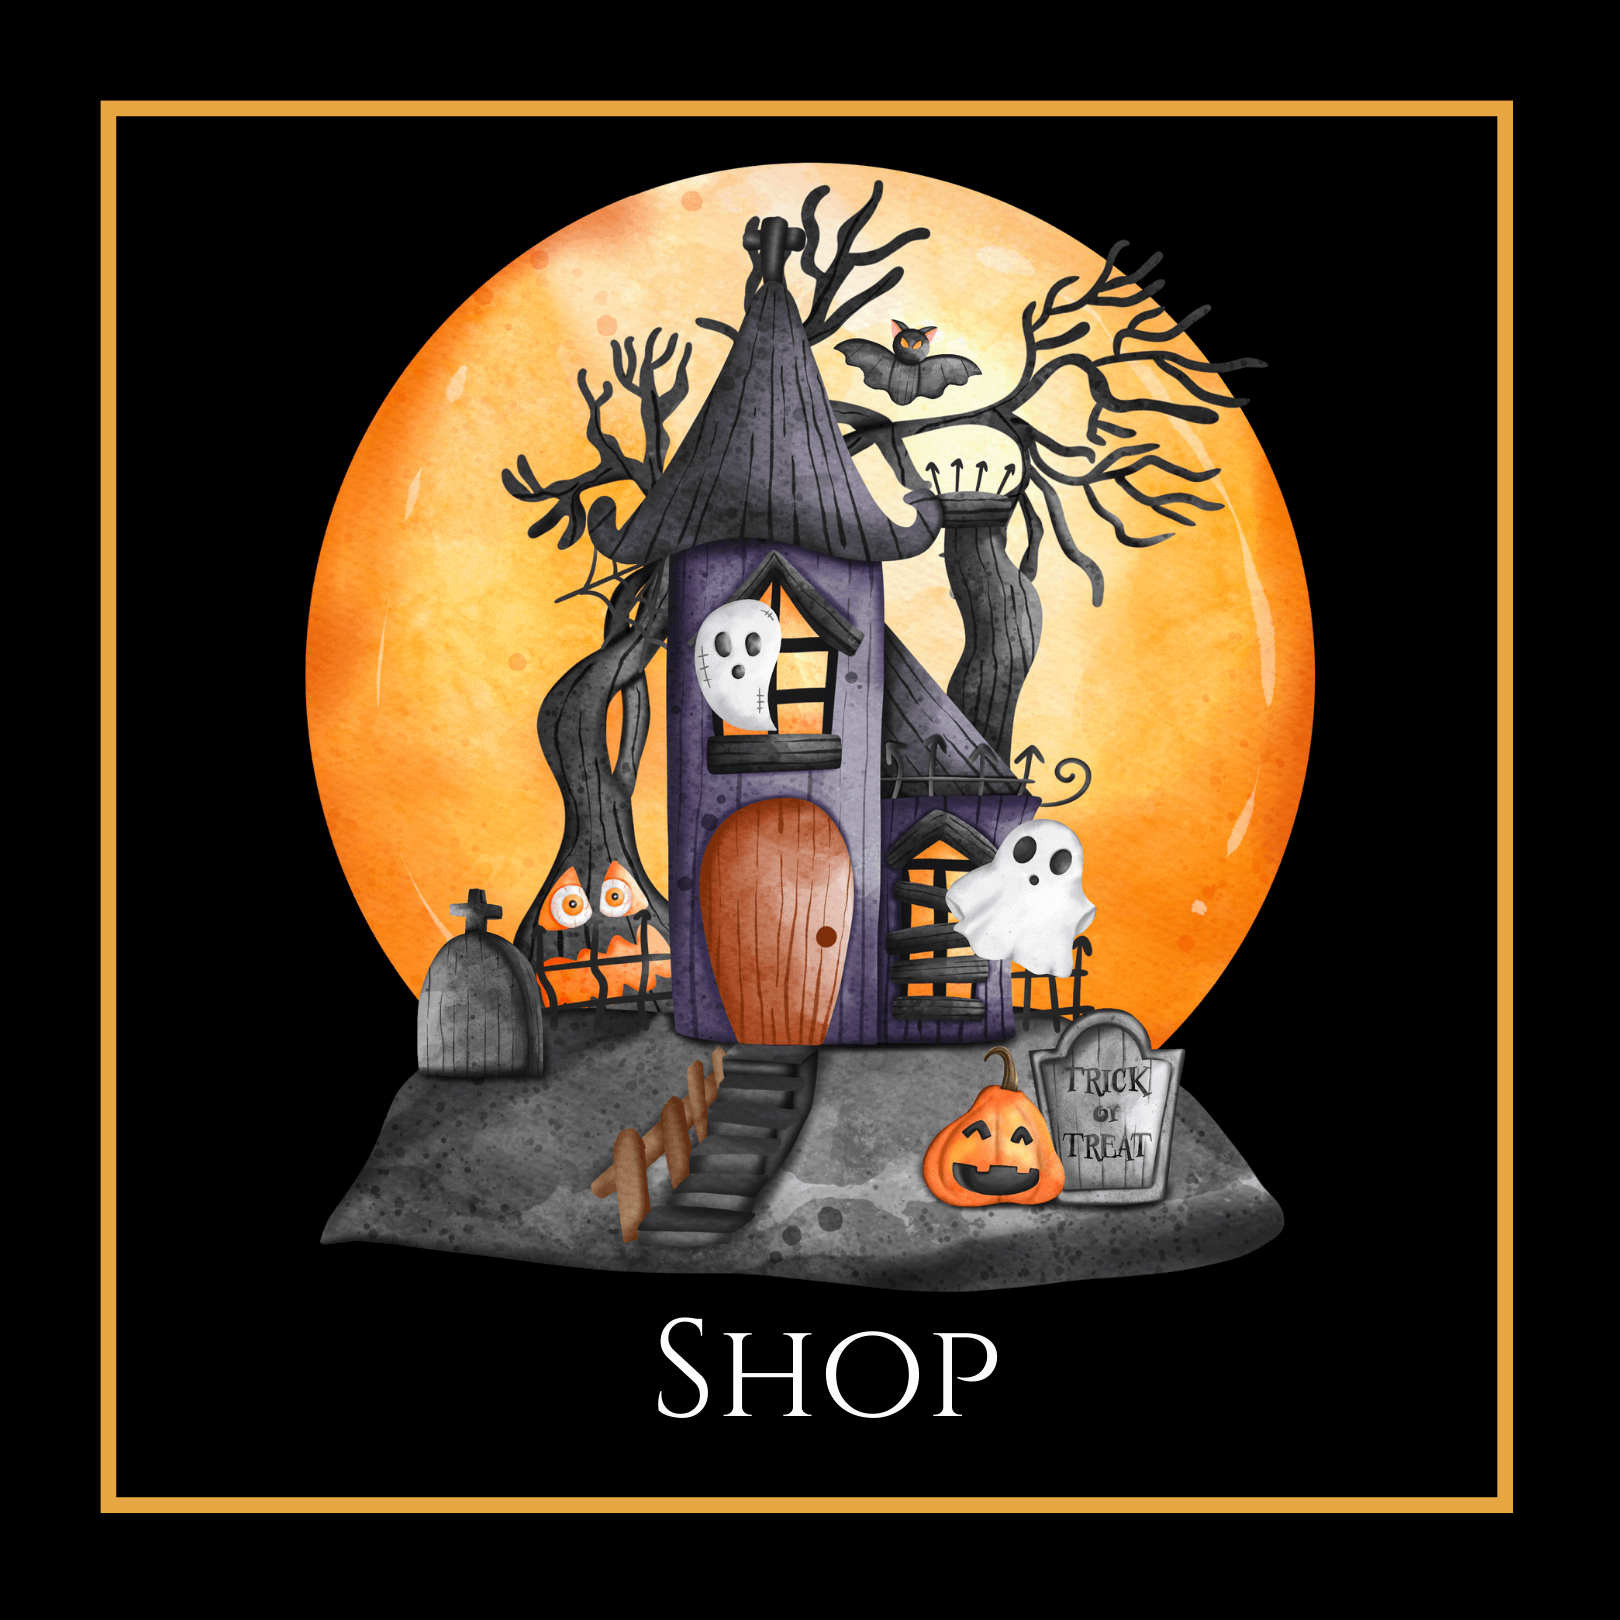 Mad Halloween Shop & Store